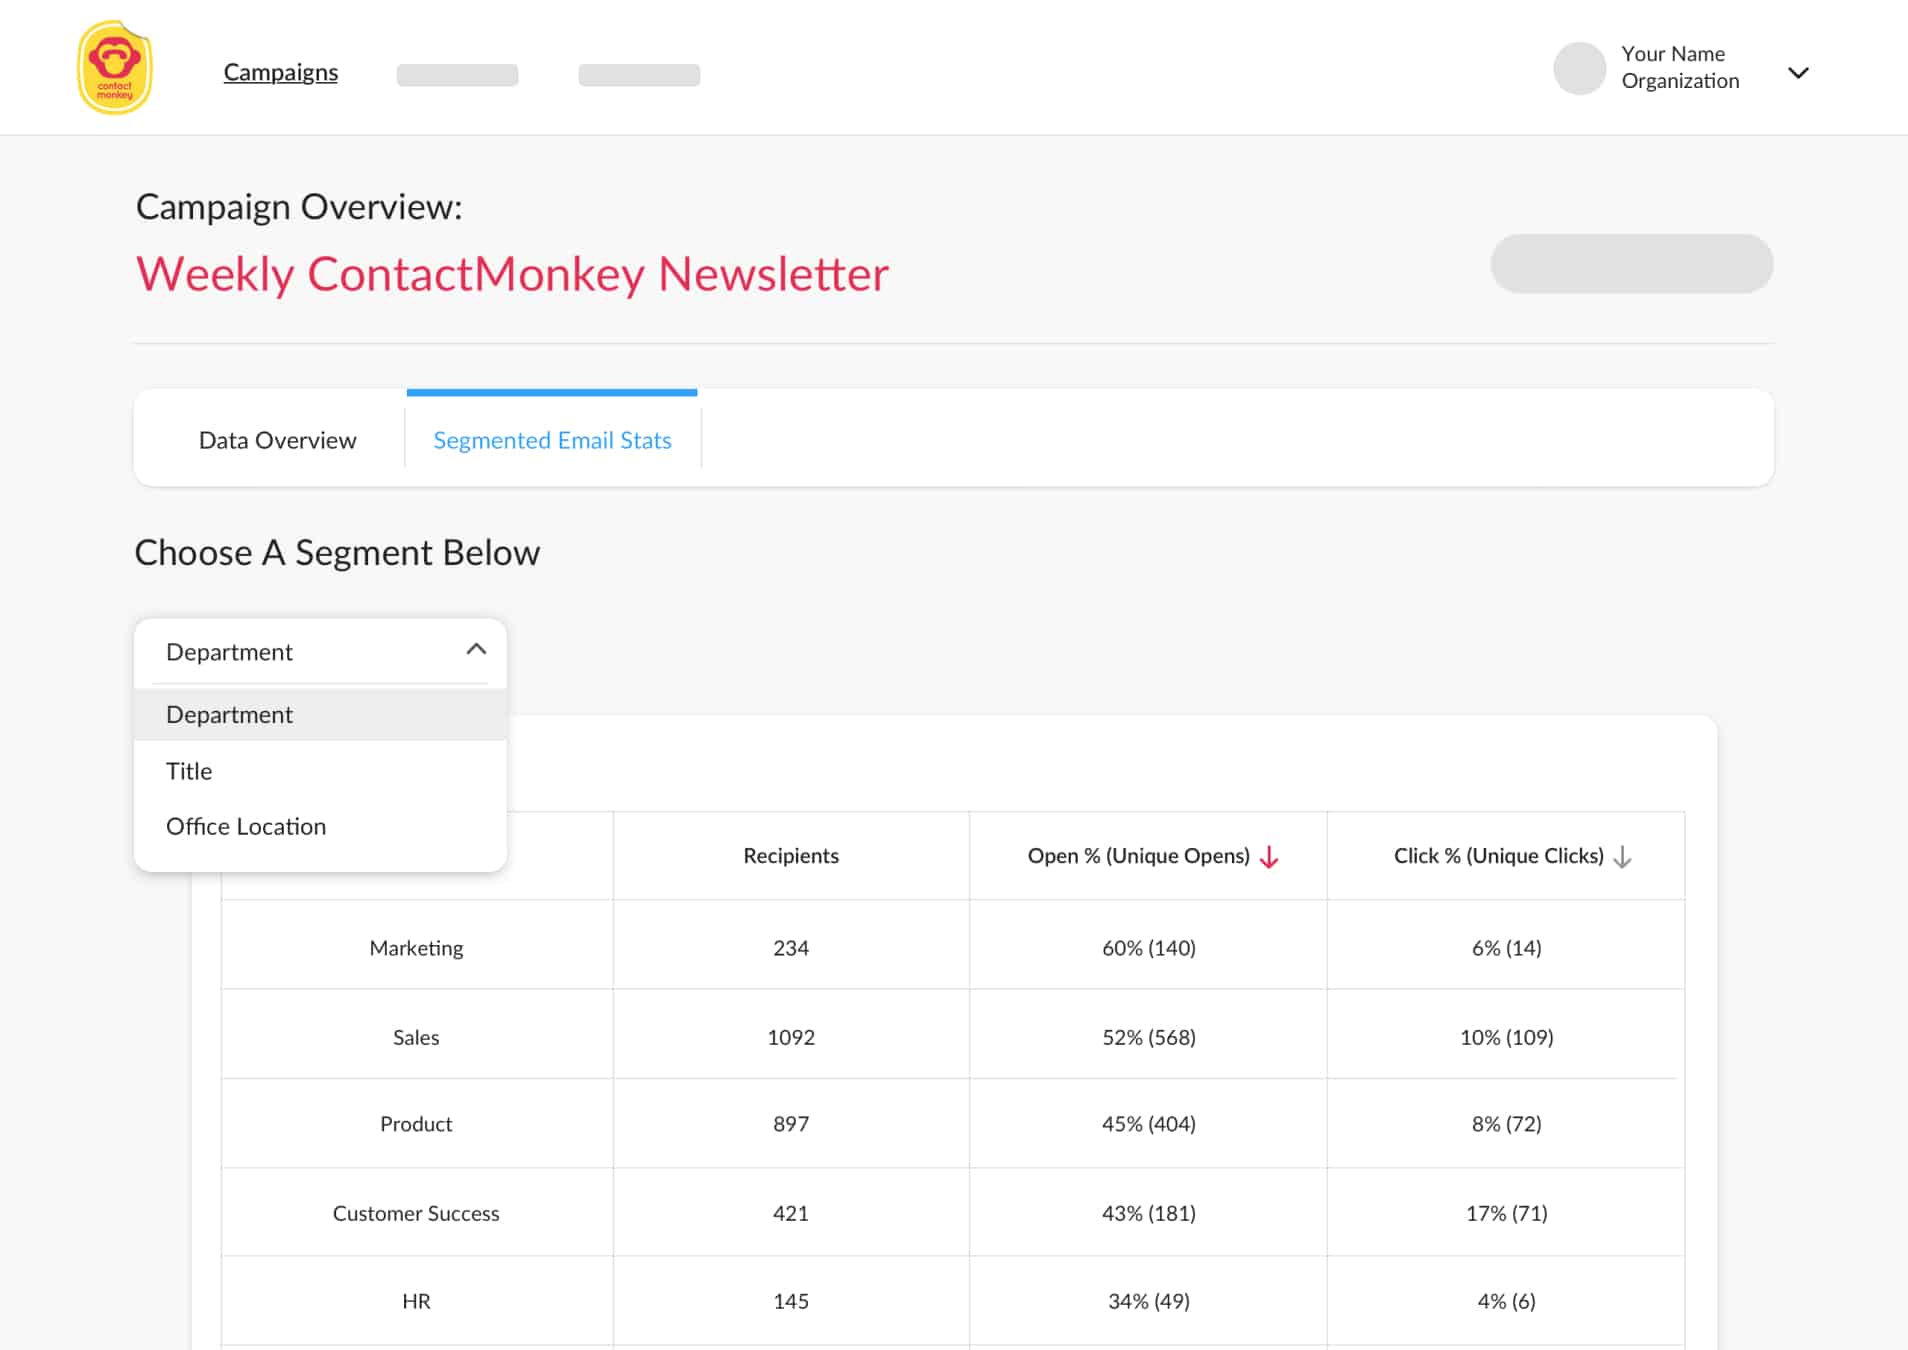 Screenshot of segmented email stats within ContactMonkey's campaign overview.